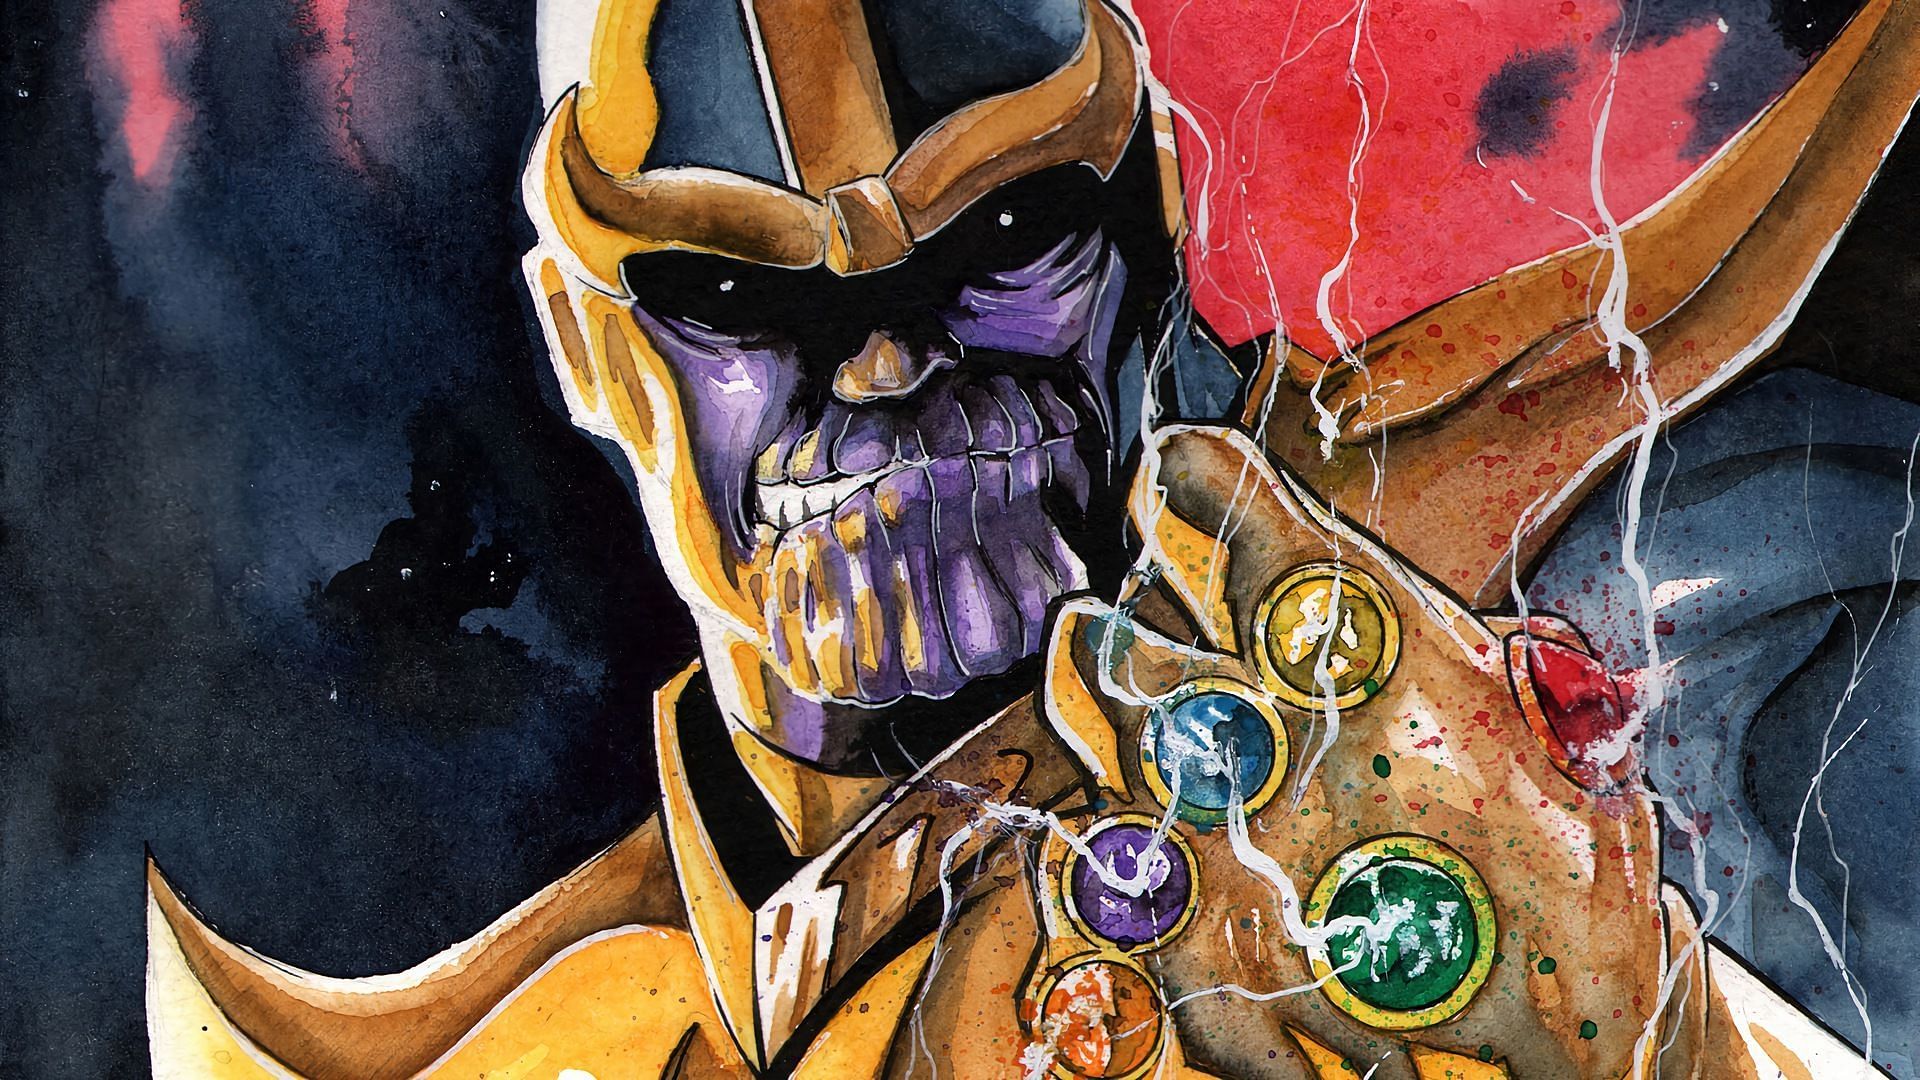 Does Thanos get all the Infinity Stones in comics (Image via Marvel)